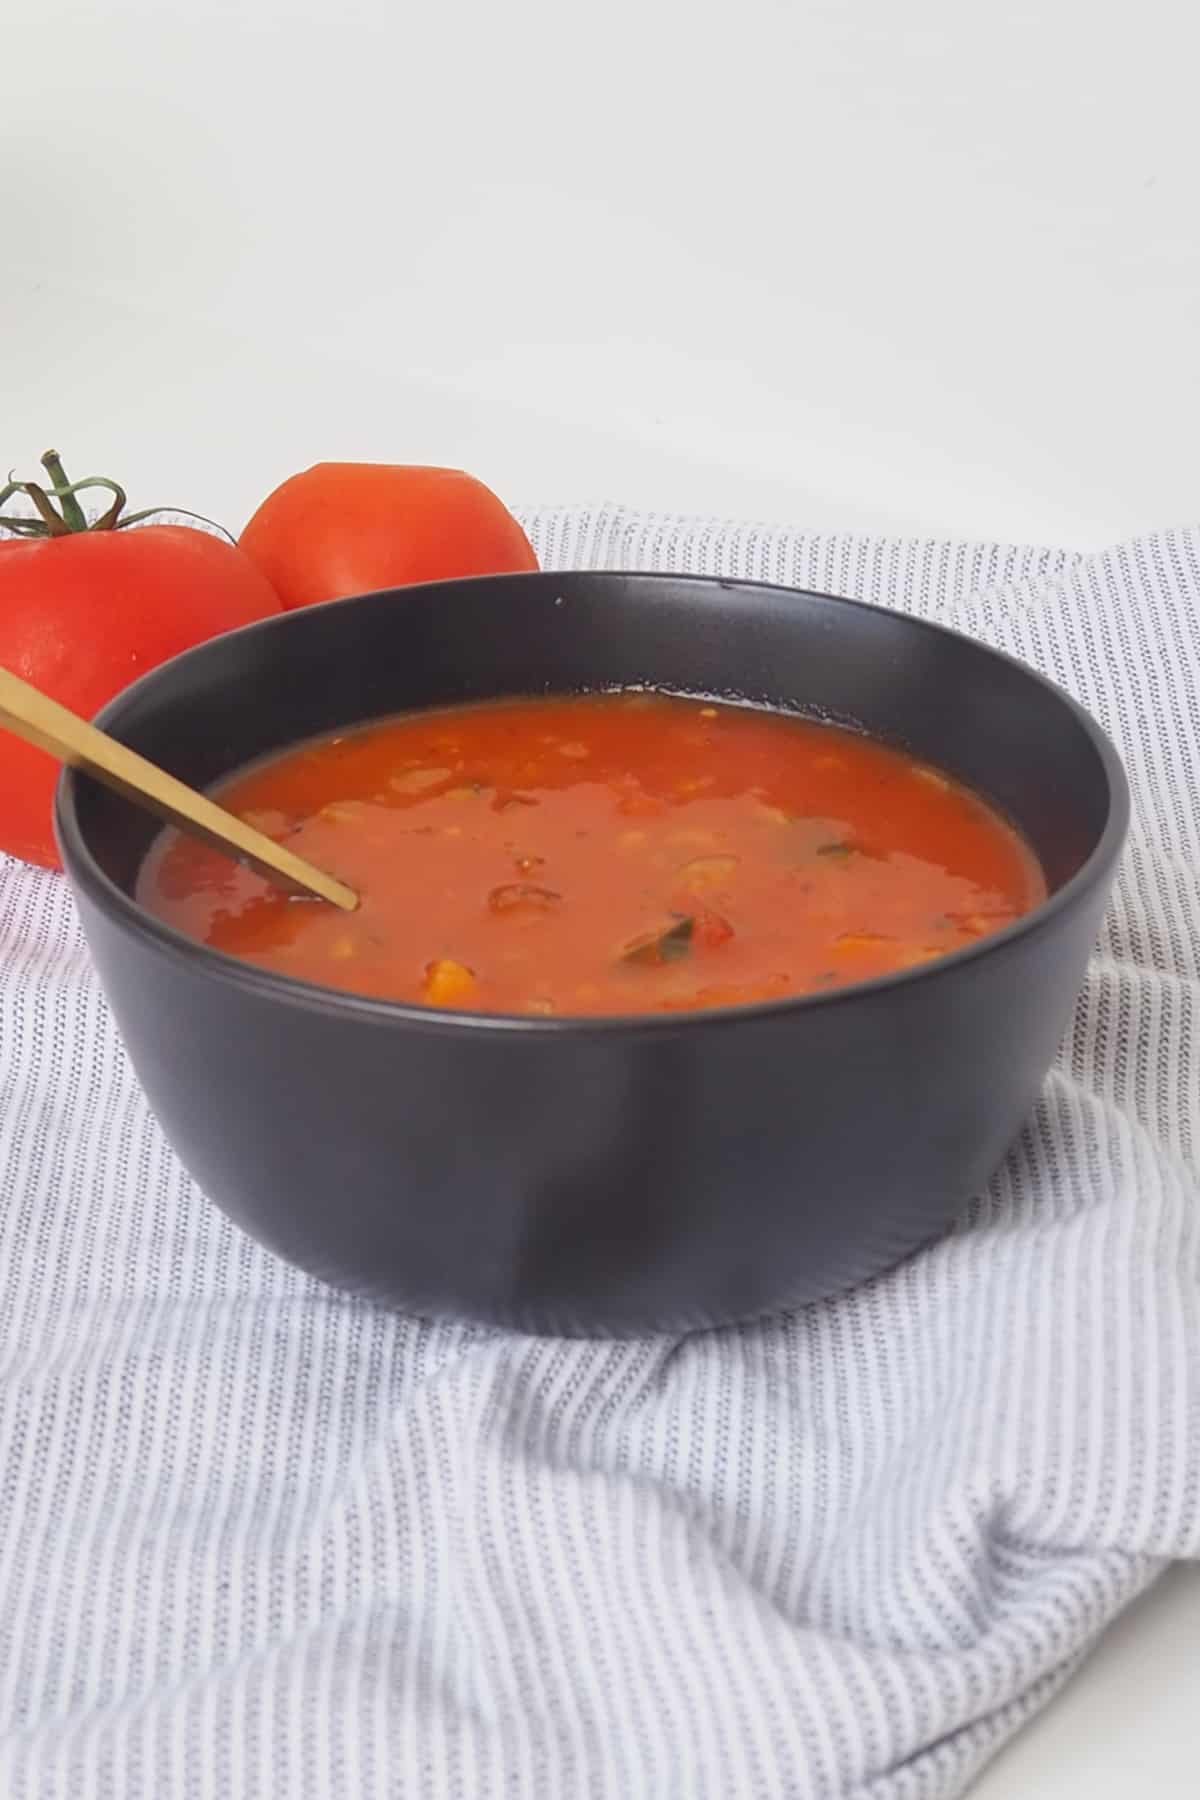 Side view of Spicy Tomato Soup in a black bowl. there is a gold spoon sitting in the bowl.